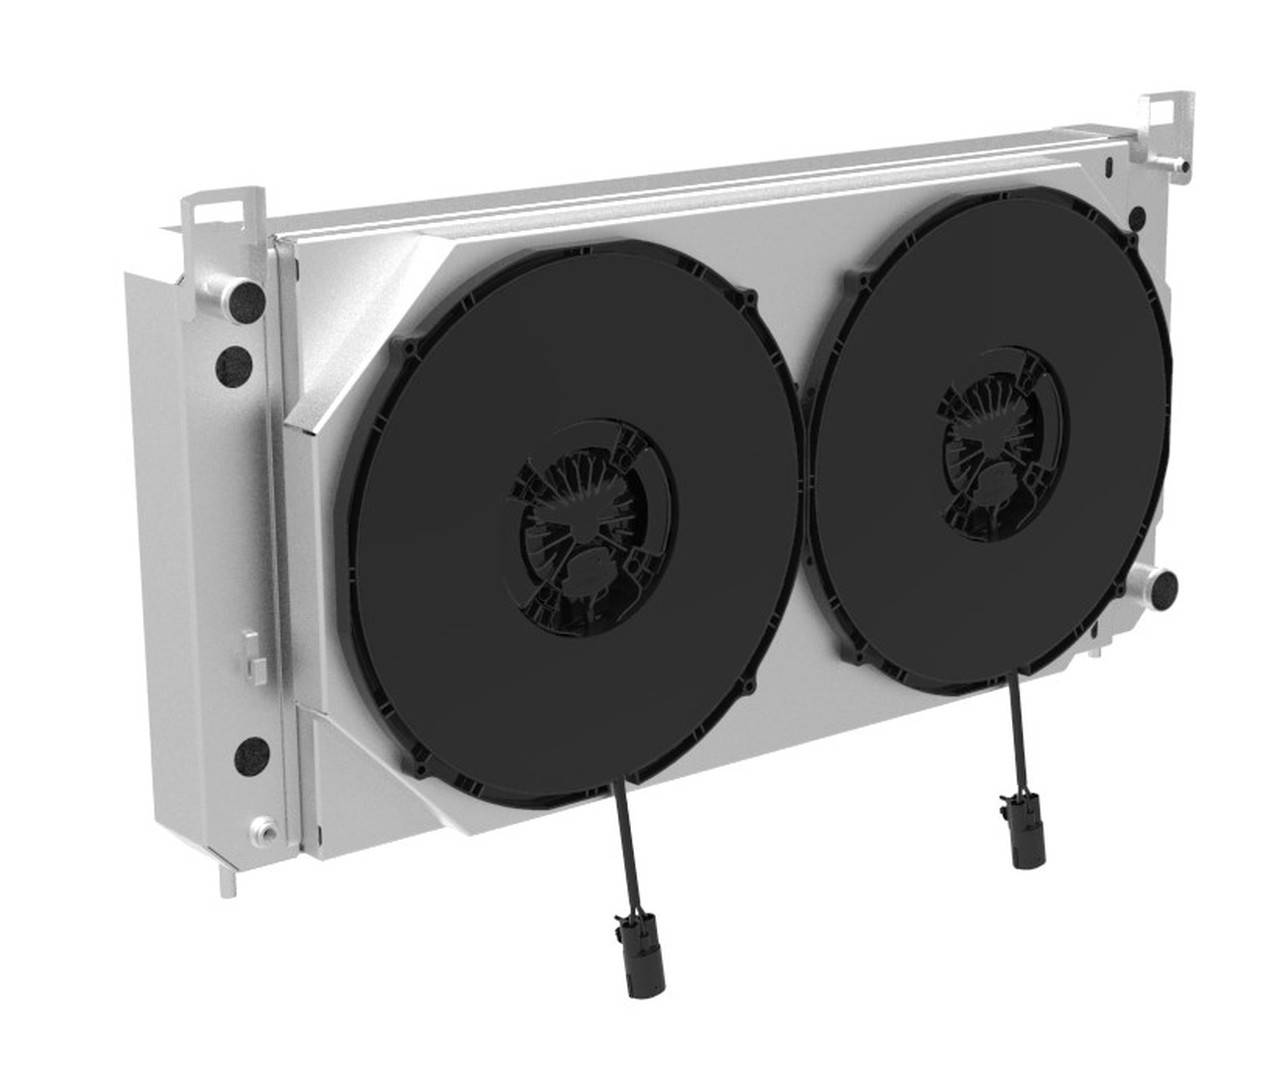 Wizard Cooling Inc - Wizard Cooling - 2001-2014 Various GM Applications Aluminum Radiator (BRUSHLESS FAN OPTIONS) - 9590-212BL